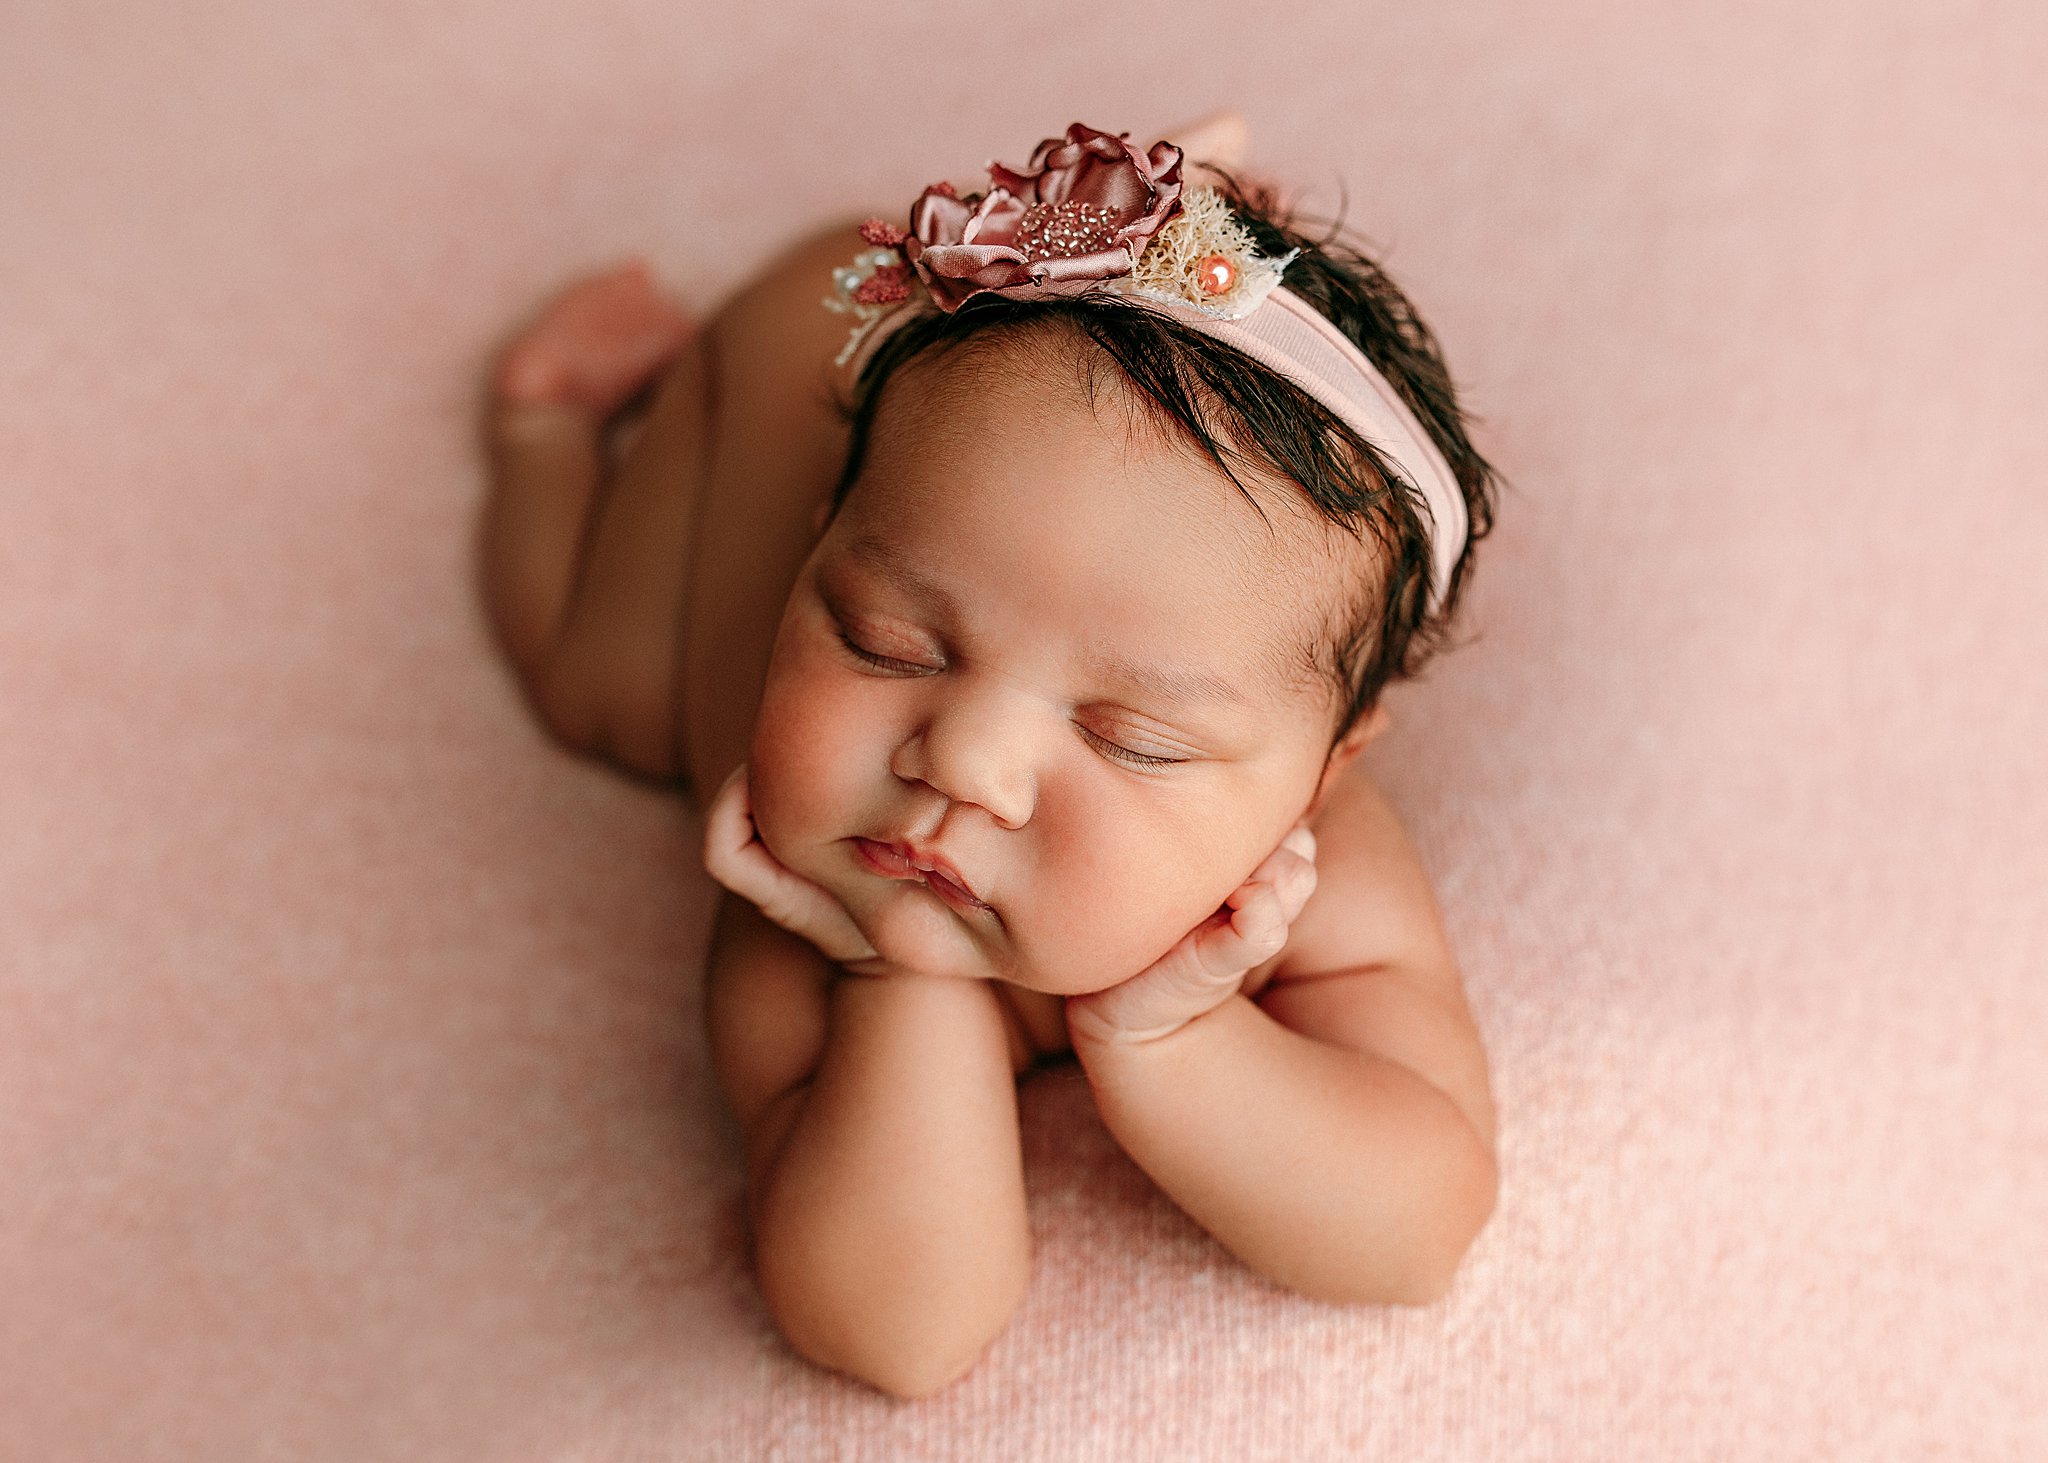 newborn baby in the froggy pose on pink fabric